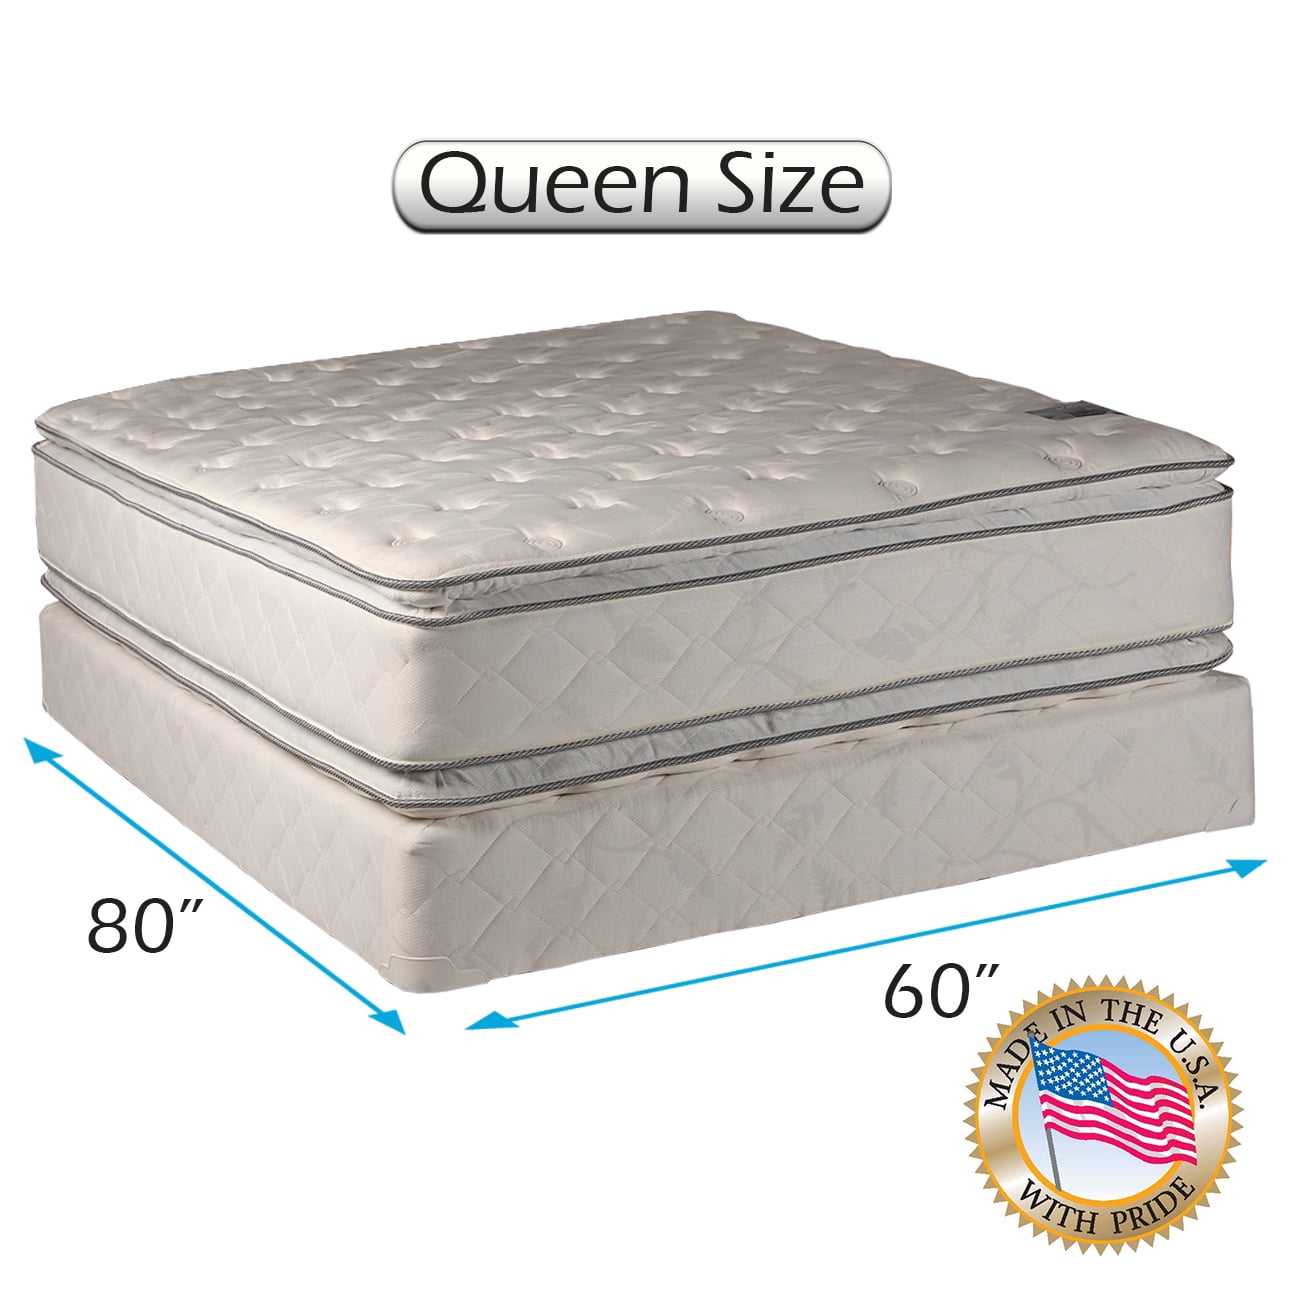 naam Hertellen Zin Serenity Pillow Top (King size) - Mattress and Box Spring Set Two-Sided  Medium Soft - Sleep System with Enhanced Cushion Support, Fully Assembled,  Orthopedic Type, Longlasting by Dream Solutions USA - Walmart.com